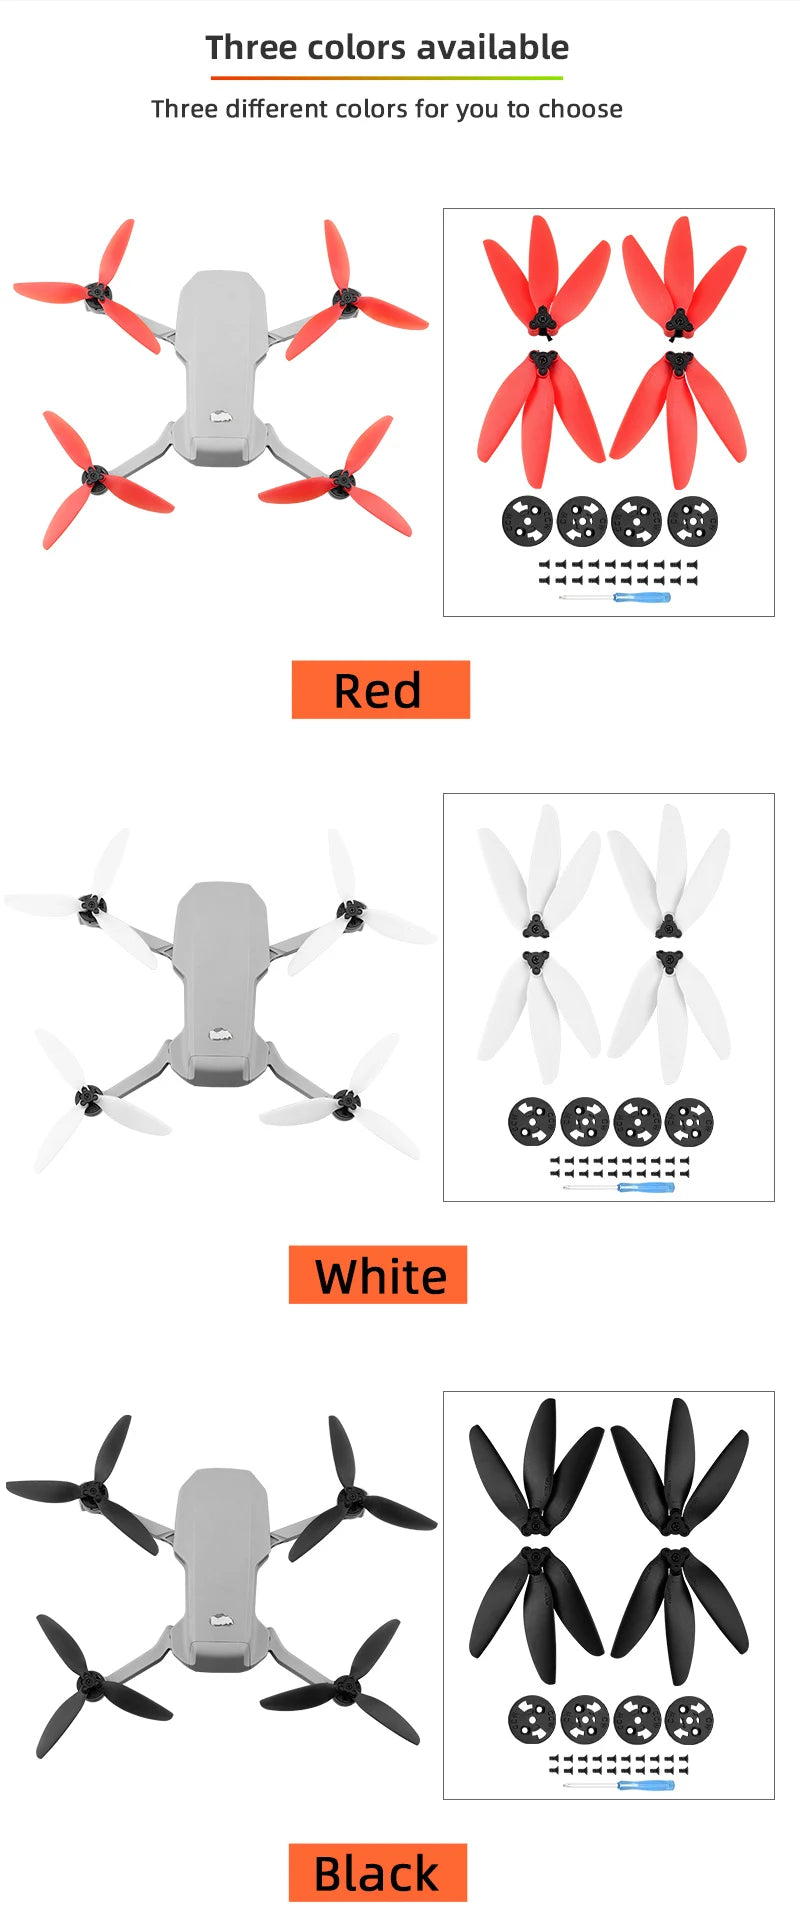 For DJI Mini 2/SE Mavic Mini Propeller, Three colors available Three different colors for you to choose 11111111: Red 8 7177111